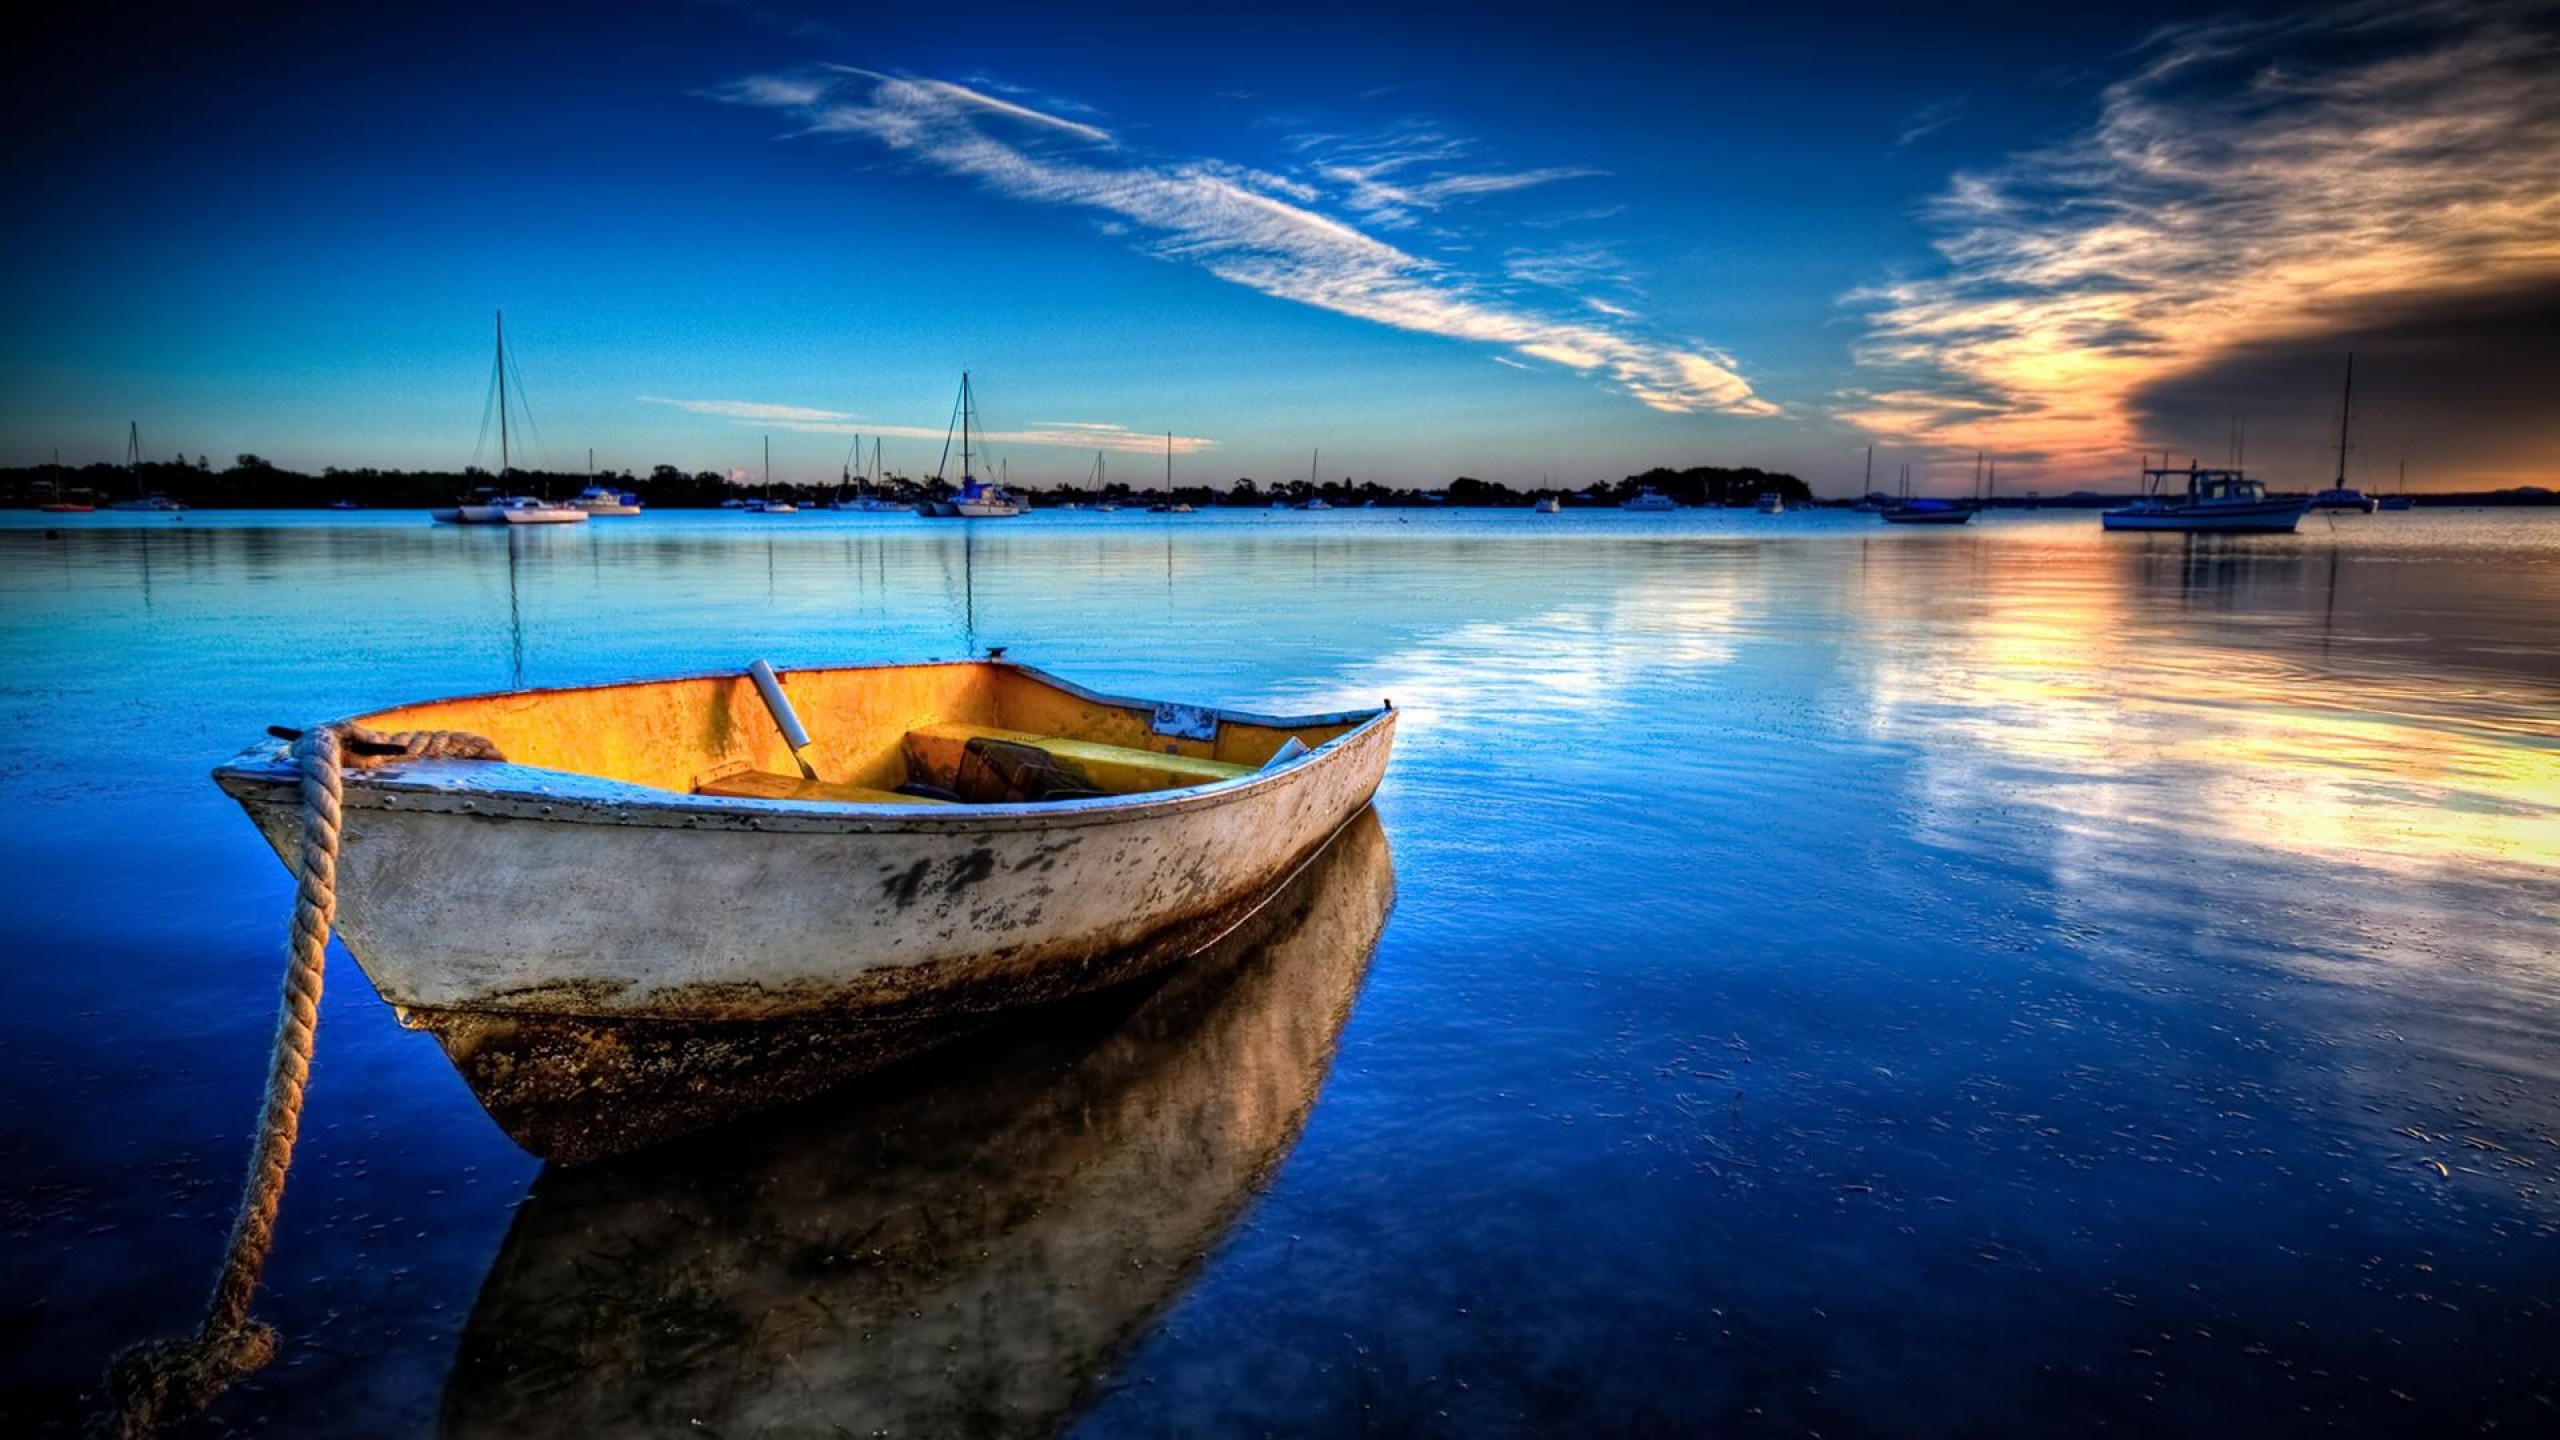 Skiff: A fishing boat, A vessel that's designed for catching fish in various bodies of water. 2560x1440 HD Wallpaper.